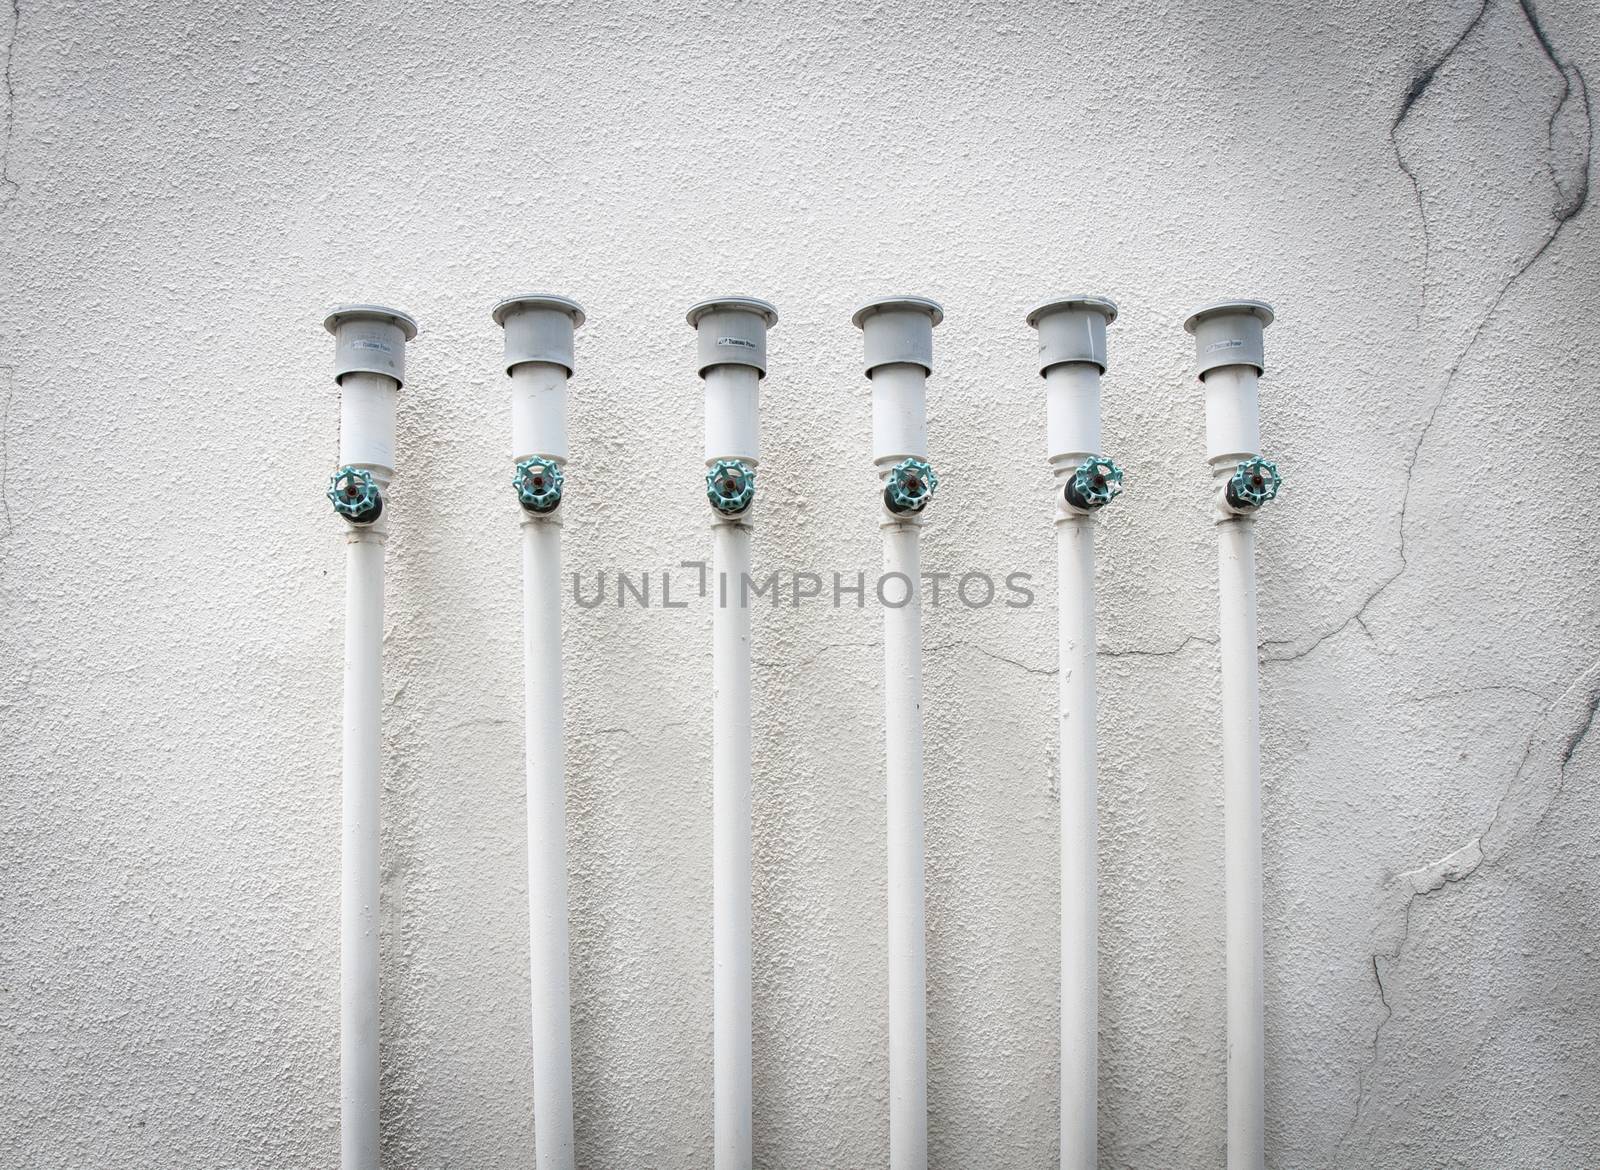 Walls and Many water pipes by Sorapop